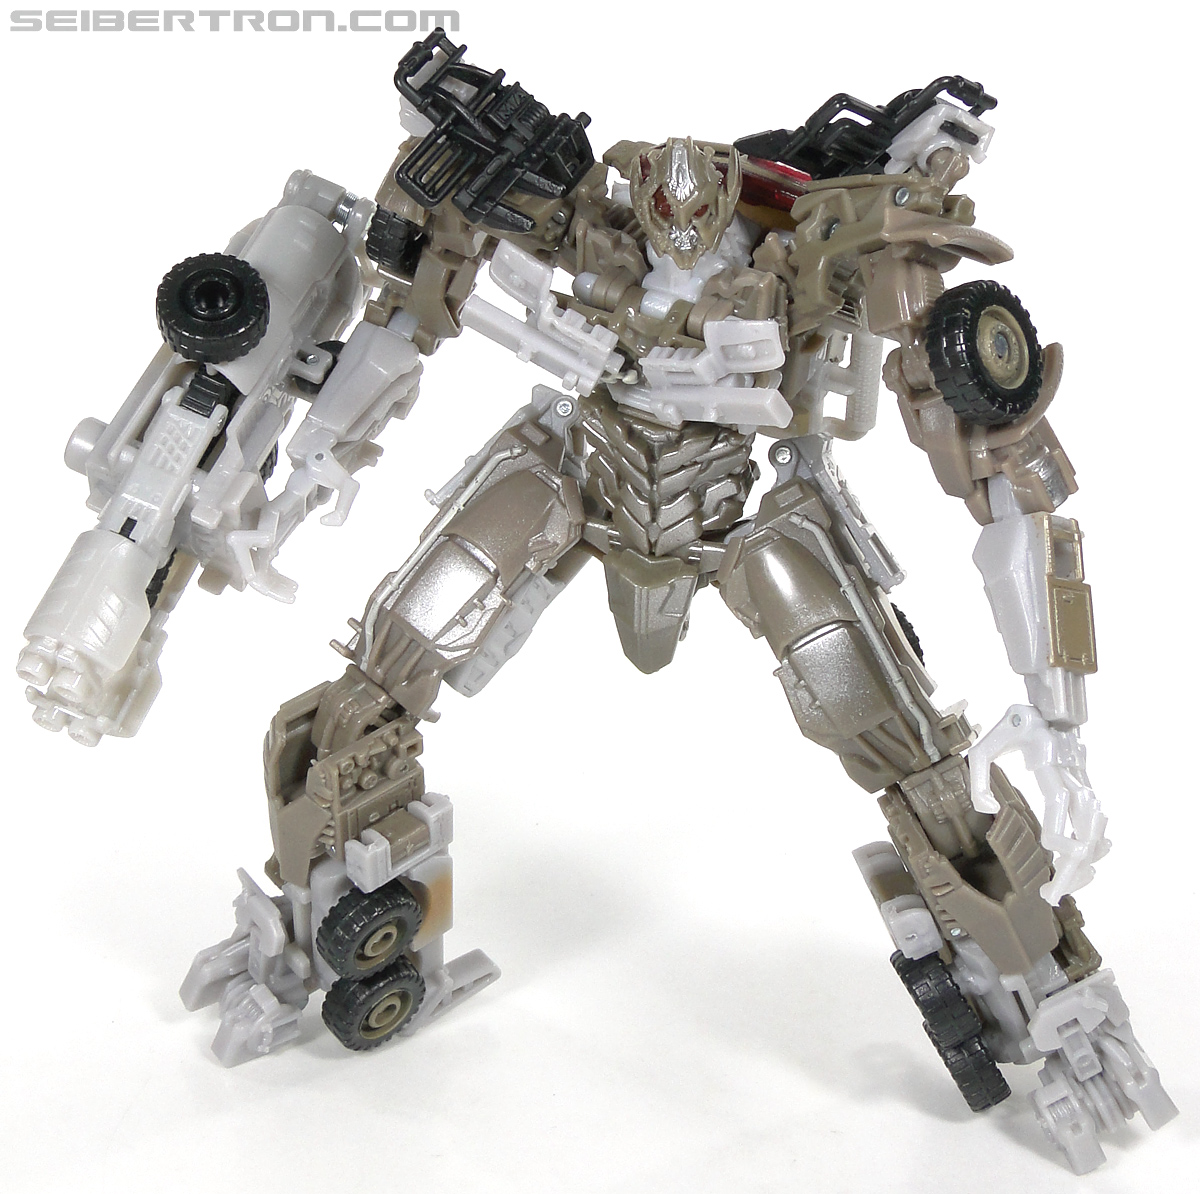 Transformers Dark of the Moon Megatron (Image #178 of 227)